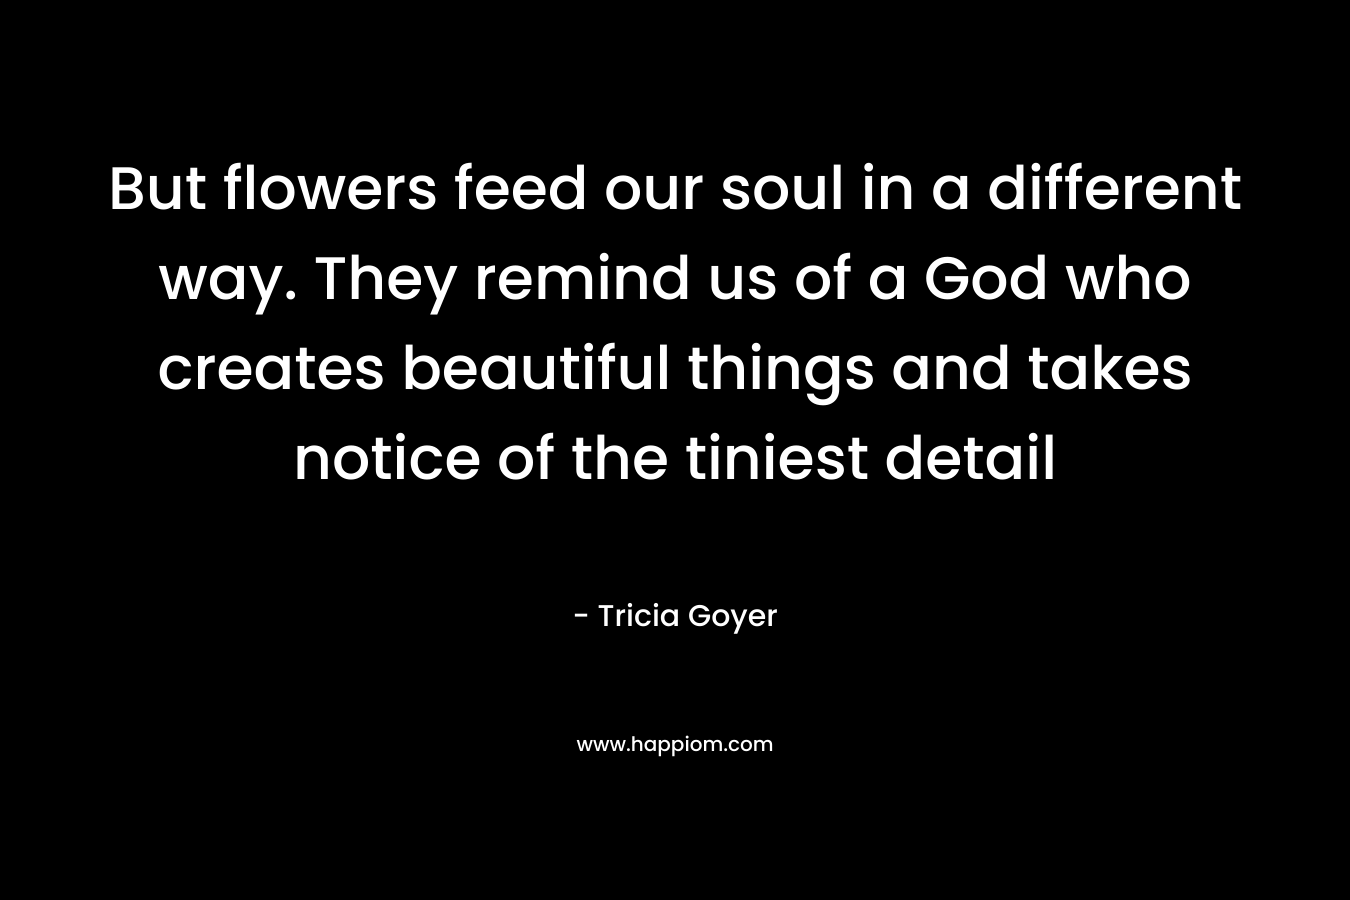 But flowers feed our soul in a different way. They remind us of a God who creates beautiful things and takes notice of the tiniest detail